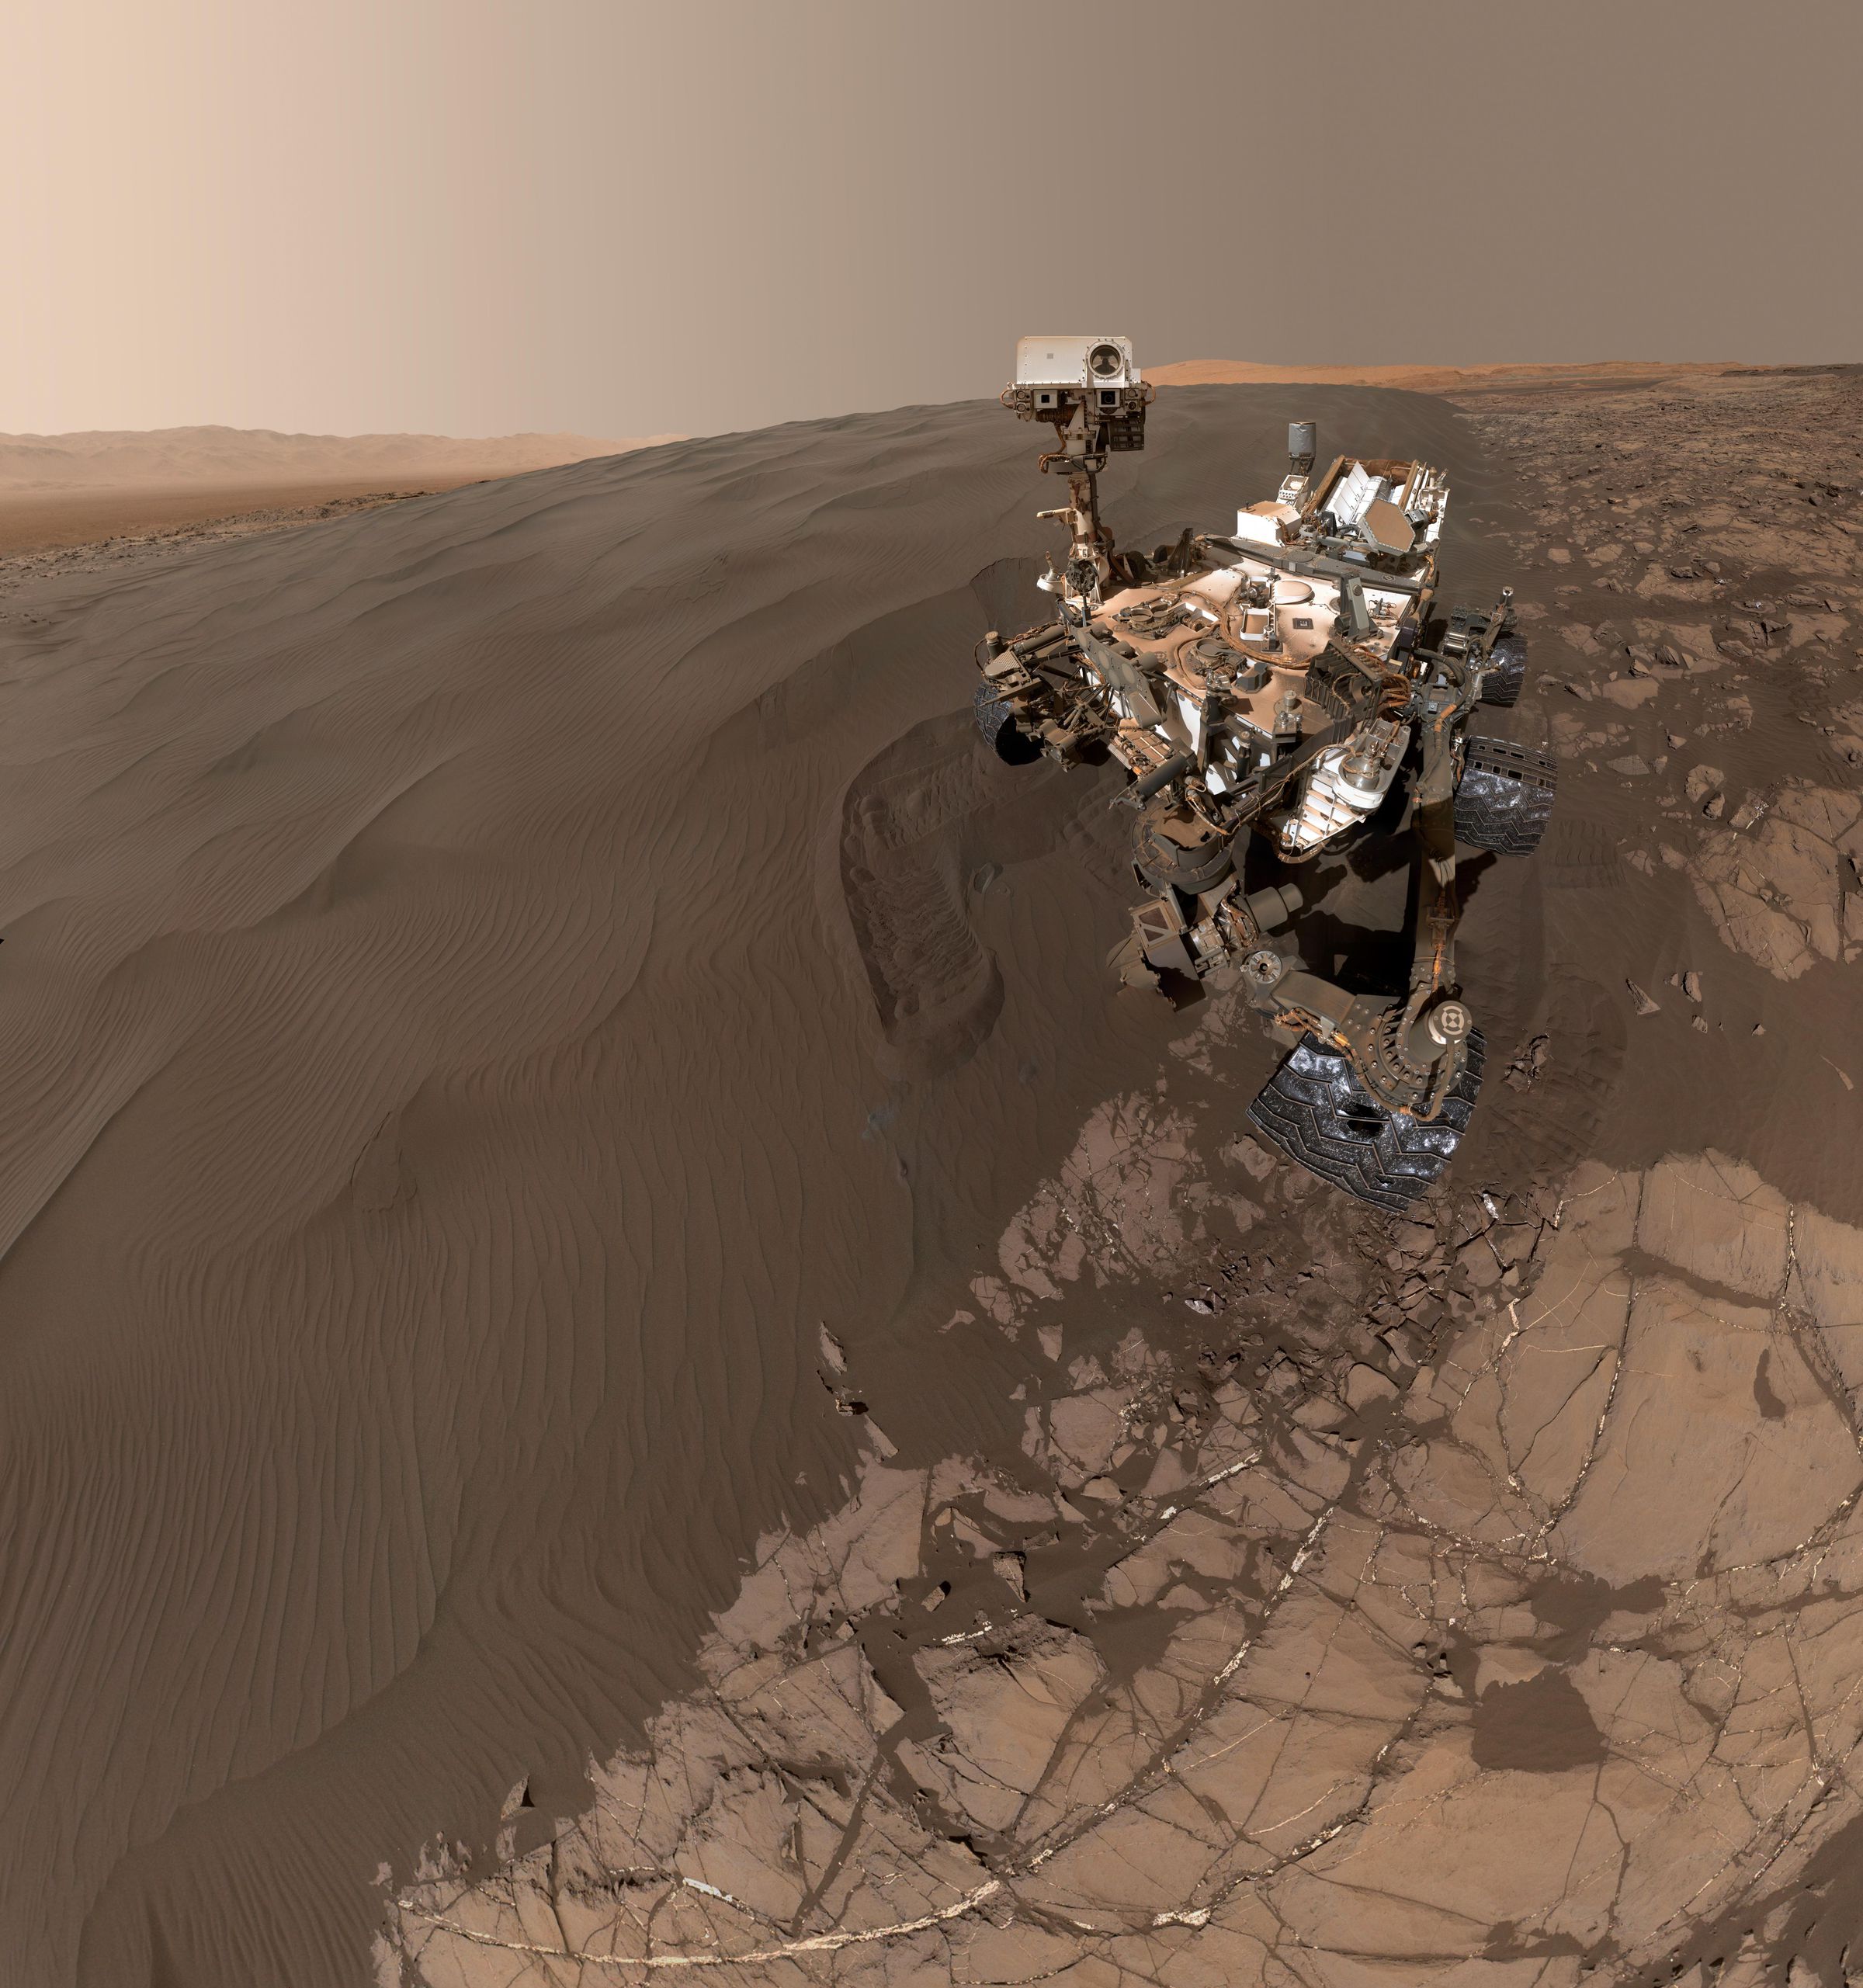 This self-portrait of NASA’s Curiosity Mars rover was taken on January 19th, 2016.